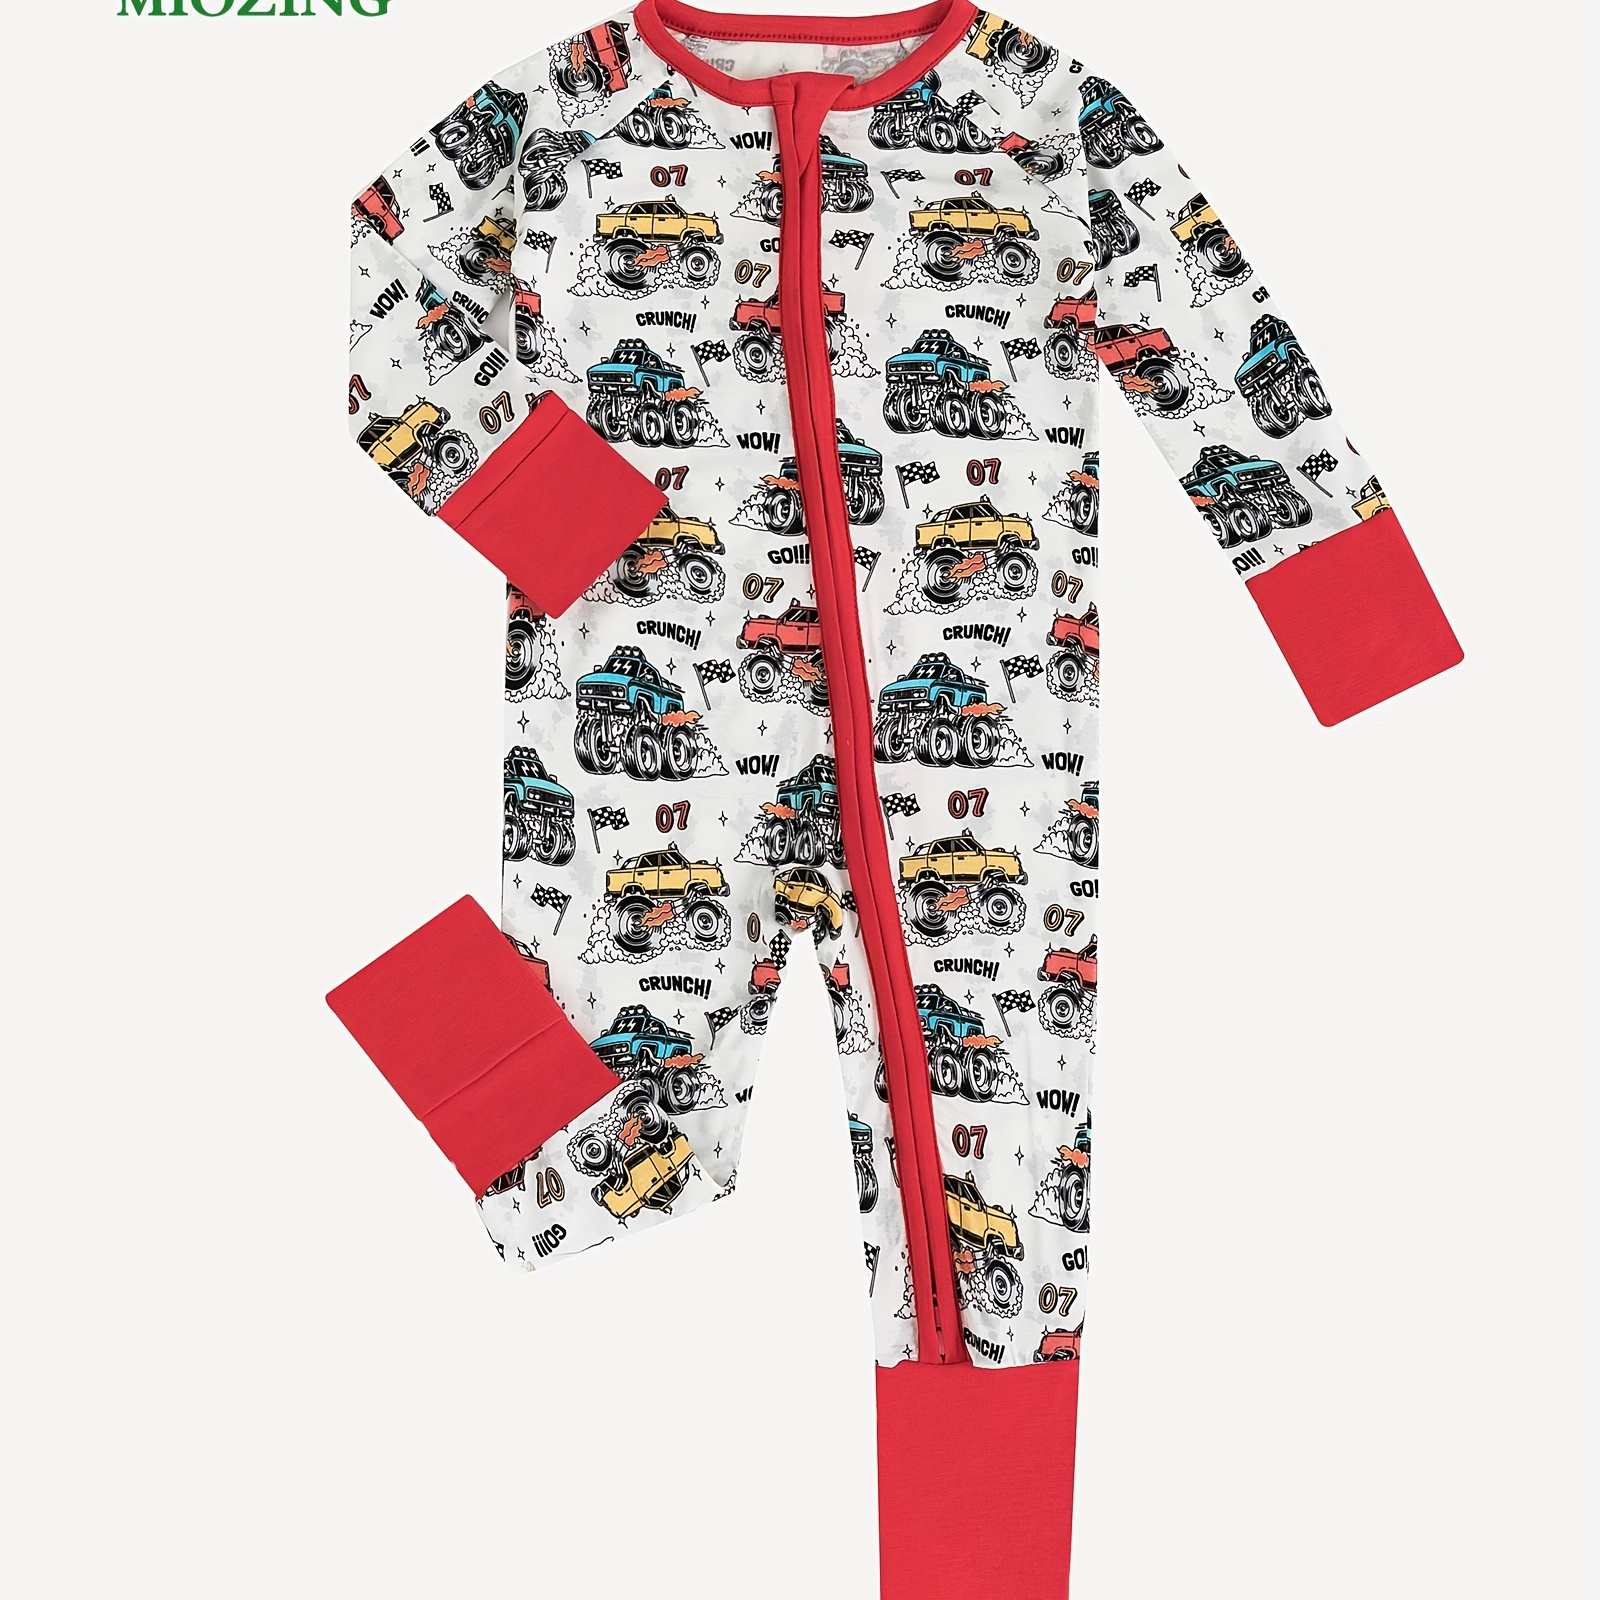 

Miozing Bamboo Fiber Soft Infant's Colorful Cartoon Truck Print Bodysuit, Comfy Bamboo Fiber Long Sleeve Onesie, Baby Boy's Clothing, As Gift, Newborn Infant & Toddler Footed Pjs, Zipper Kids Jumpsuit